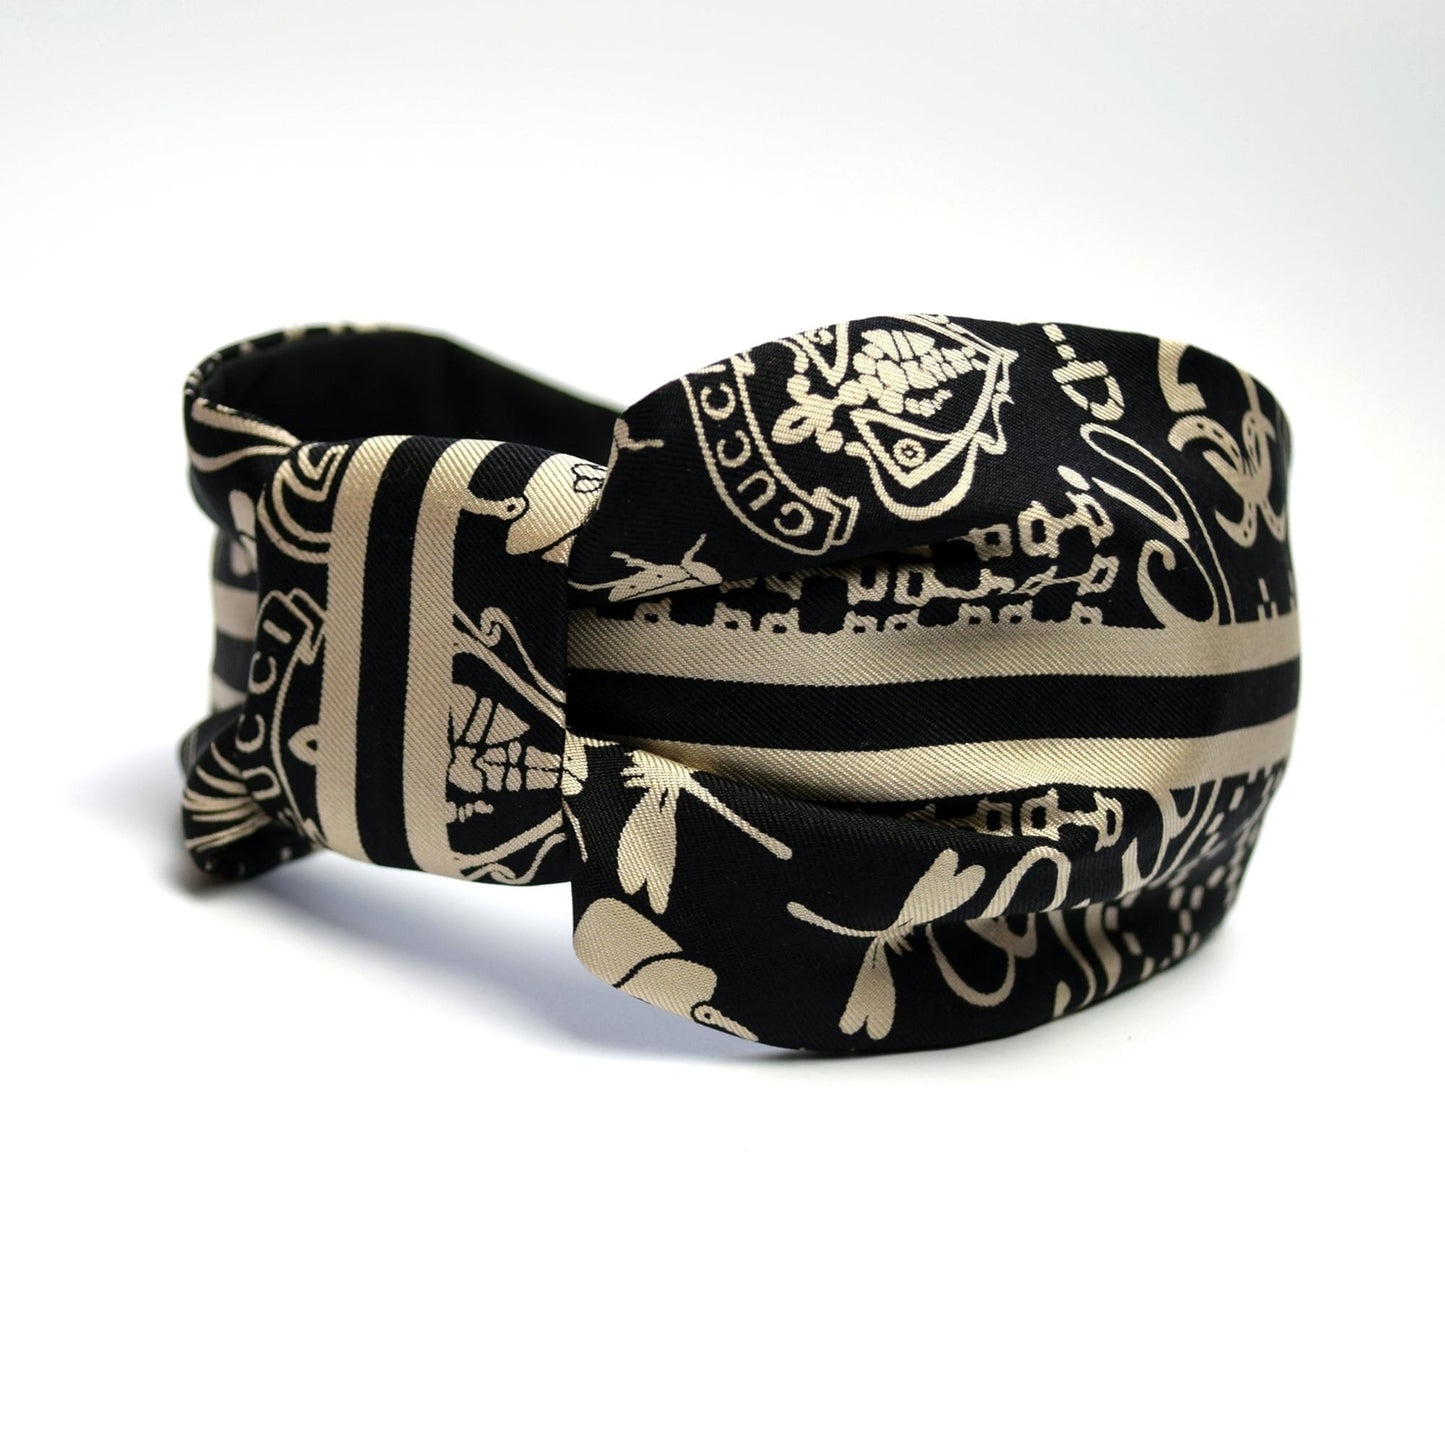 Upcycled and Reworked Gucci Headband